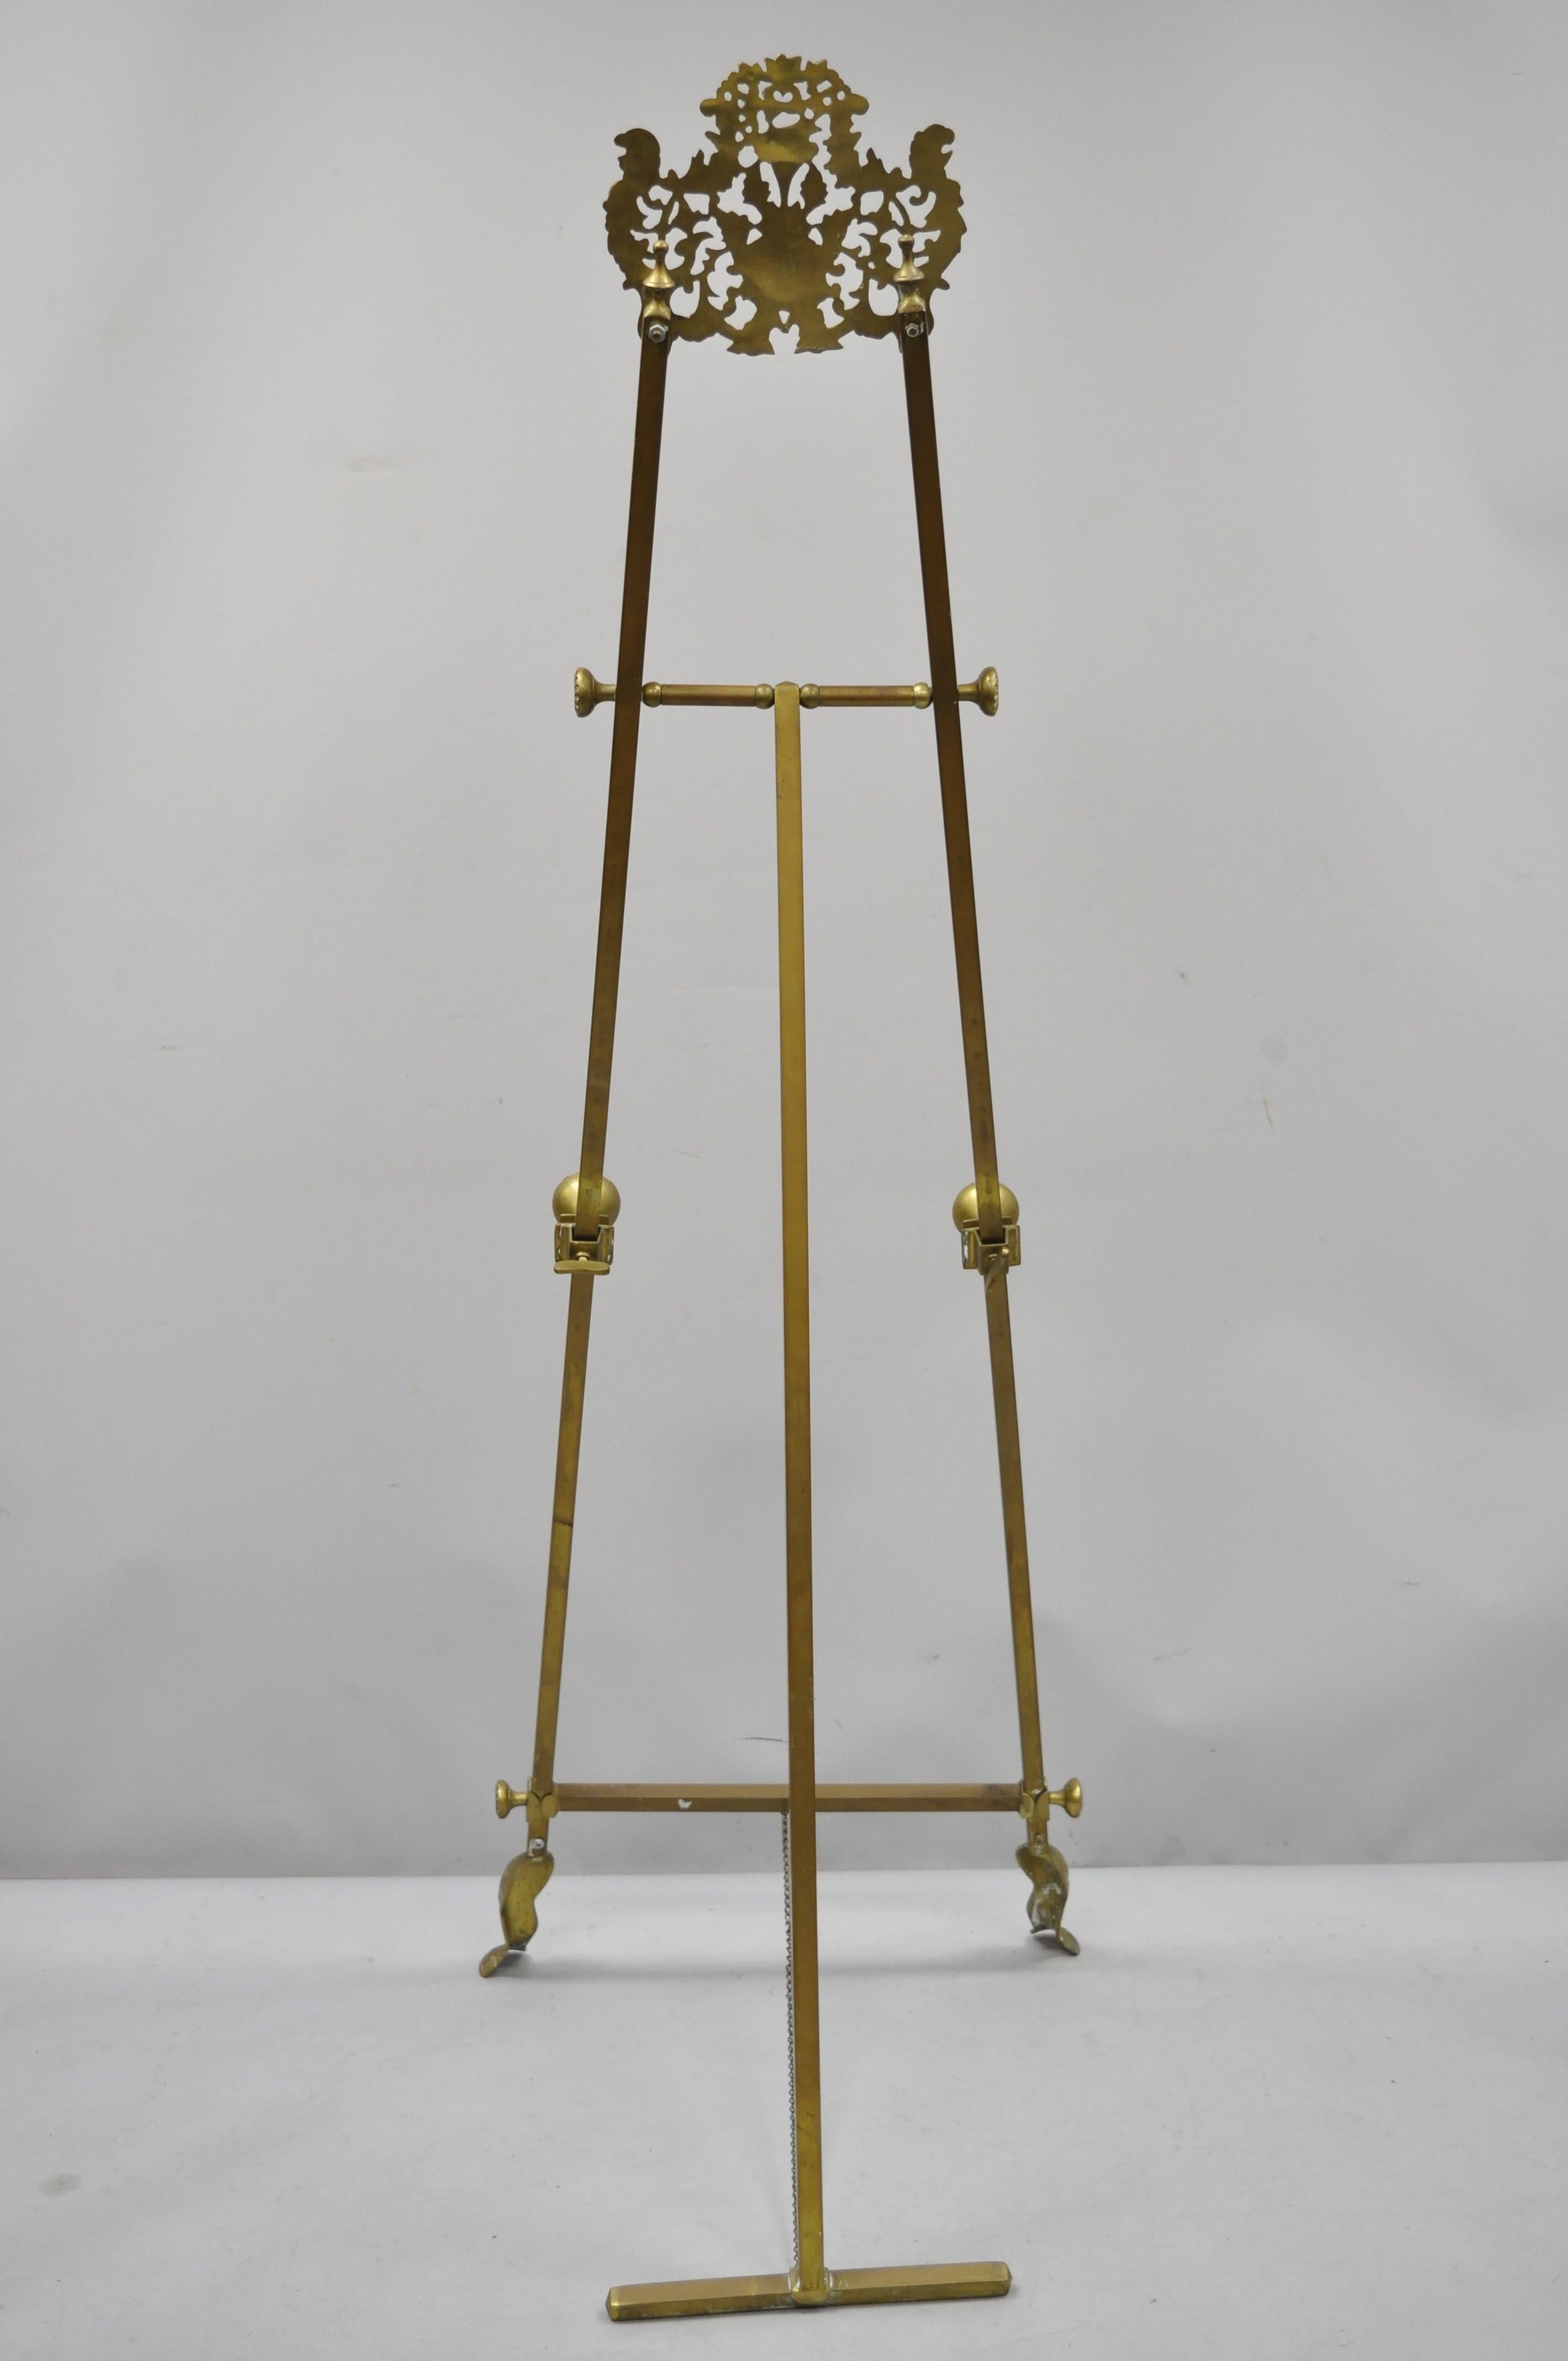 Antique Brass Victorian Filigree Tall Painting Easel Tripod Art Canvas Stand 3